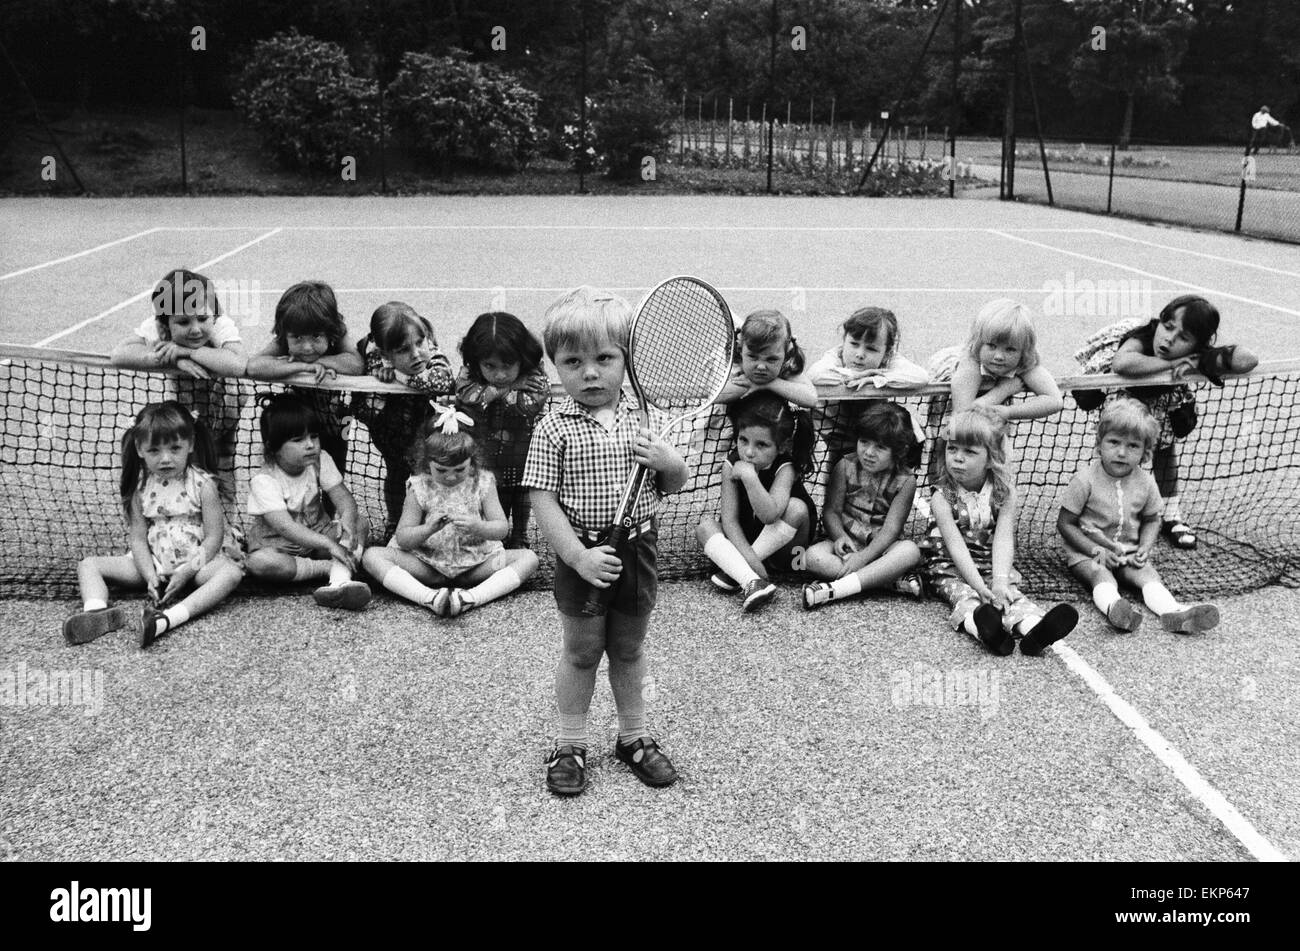 Three year old Daniel Jarmin holds a tennis racket as he poses with other friends in his class at a kindergarten school he attends in Ilford, Greater London. Daniel is a possible Wimbledon entry of the future. 19th June 1973. Stock Photo